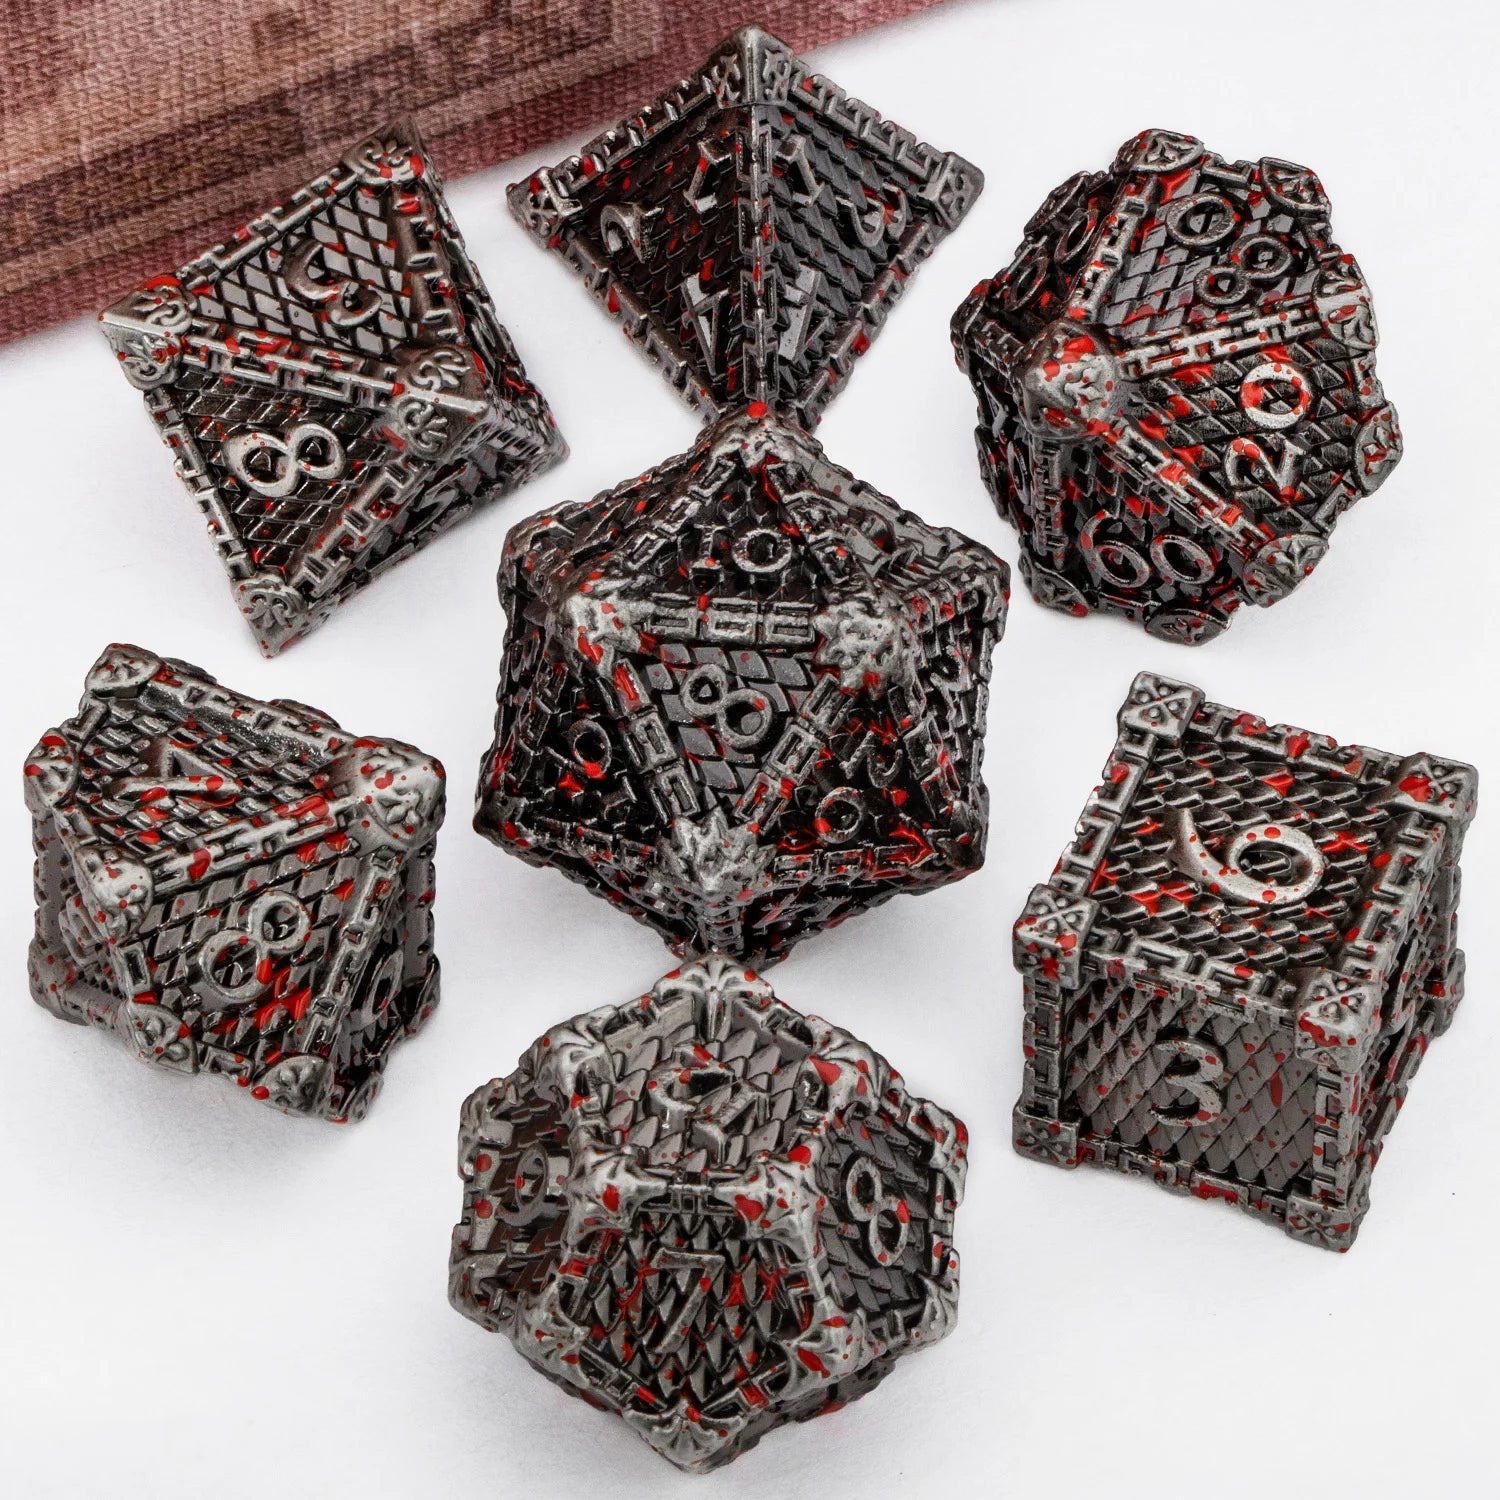 DND Metal Dice Set Dragon Scale Blood D&D Dice Dungeon and Dragon Role Playing Games Polyhedral Dice RPG D and D Dice Blood Spatter